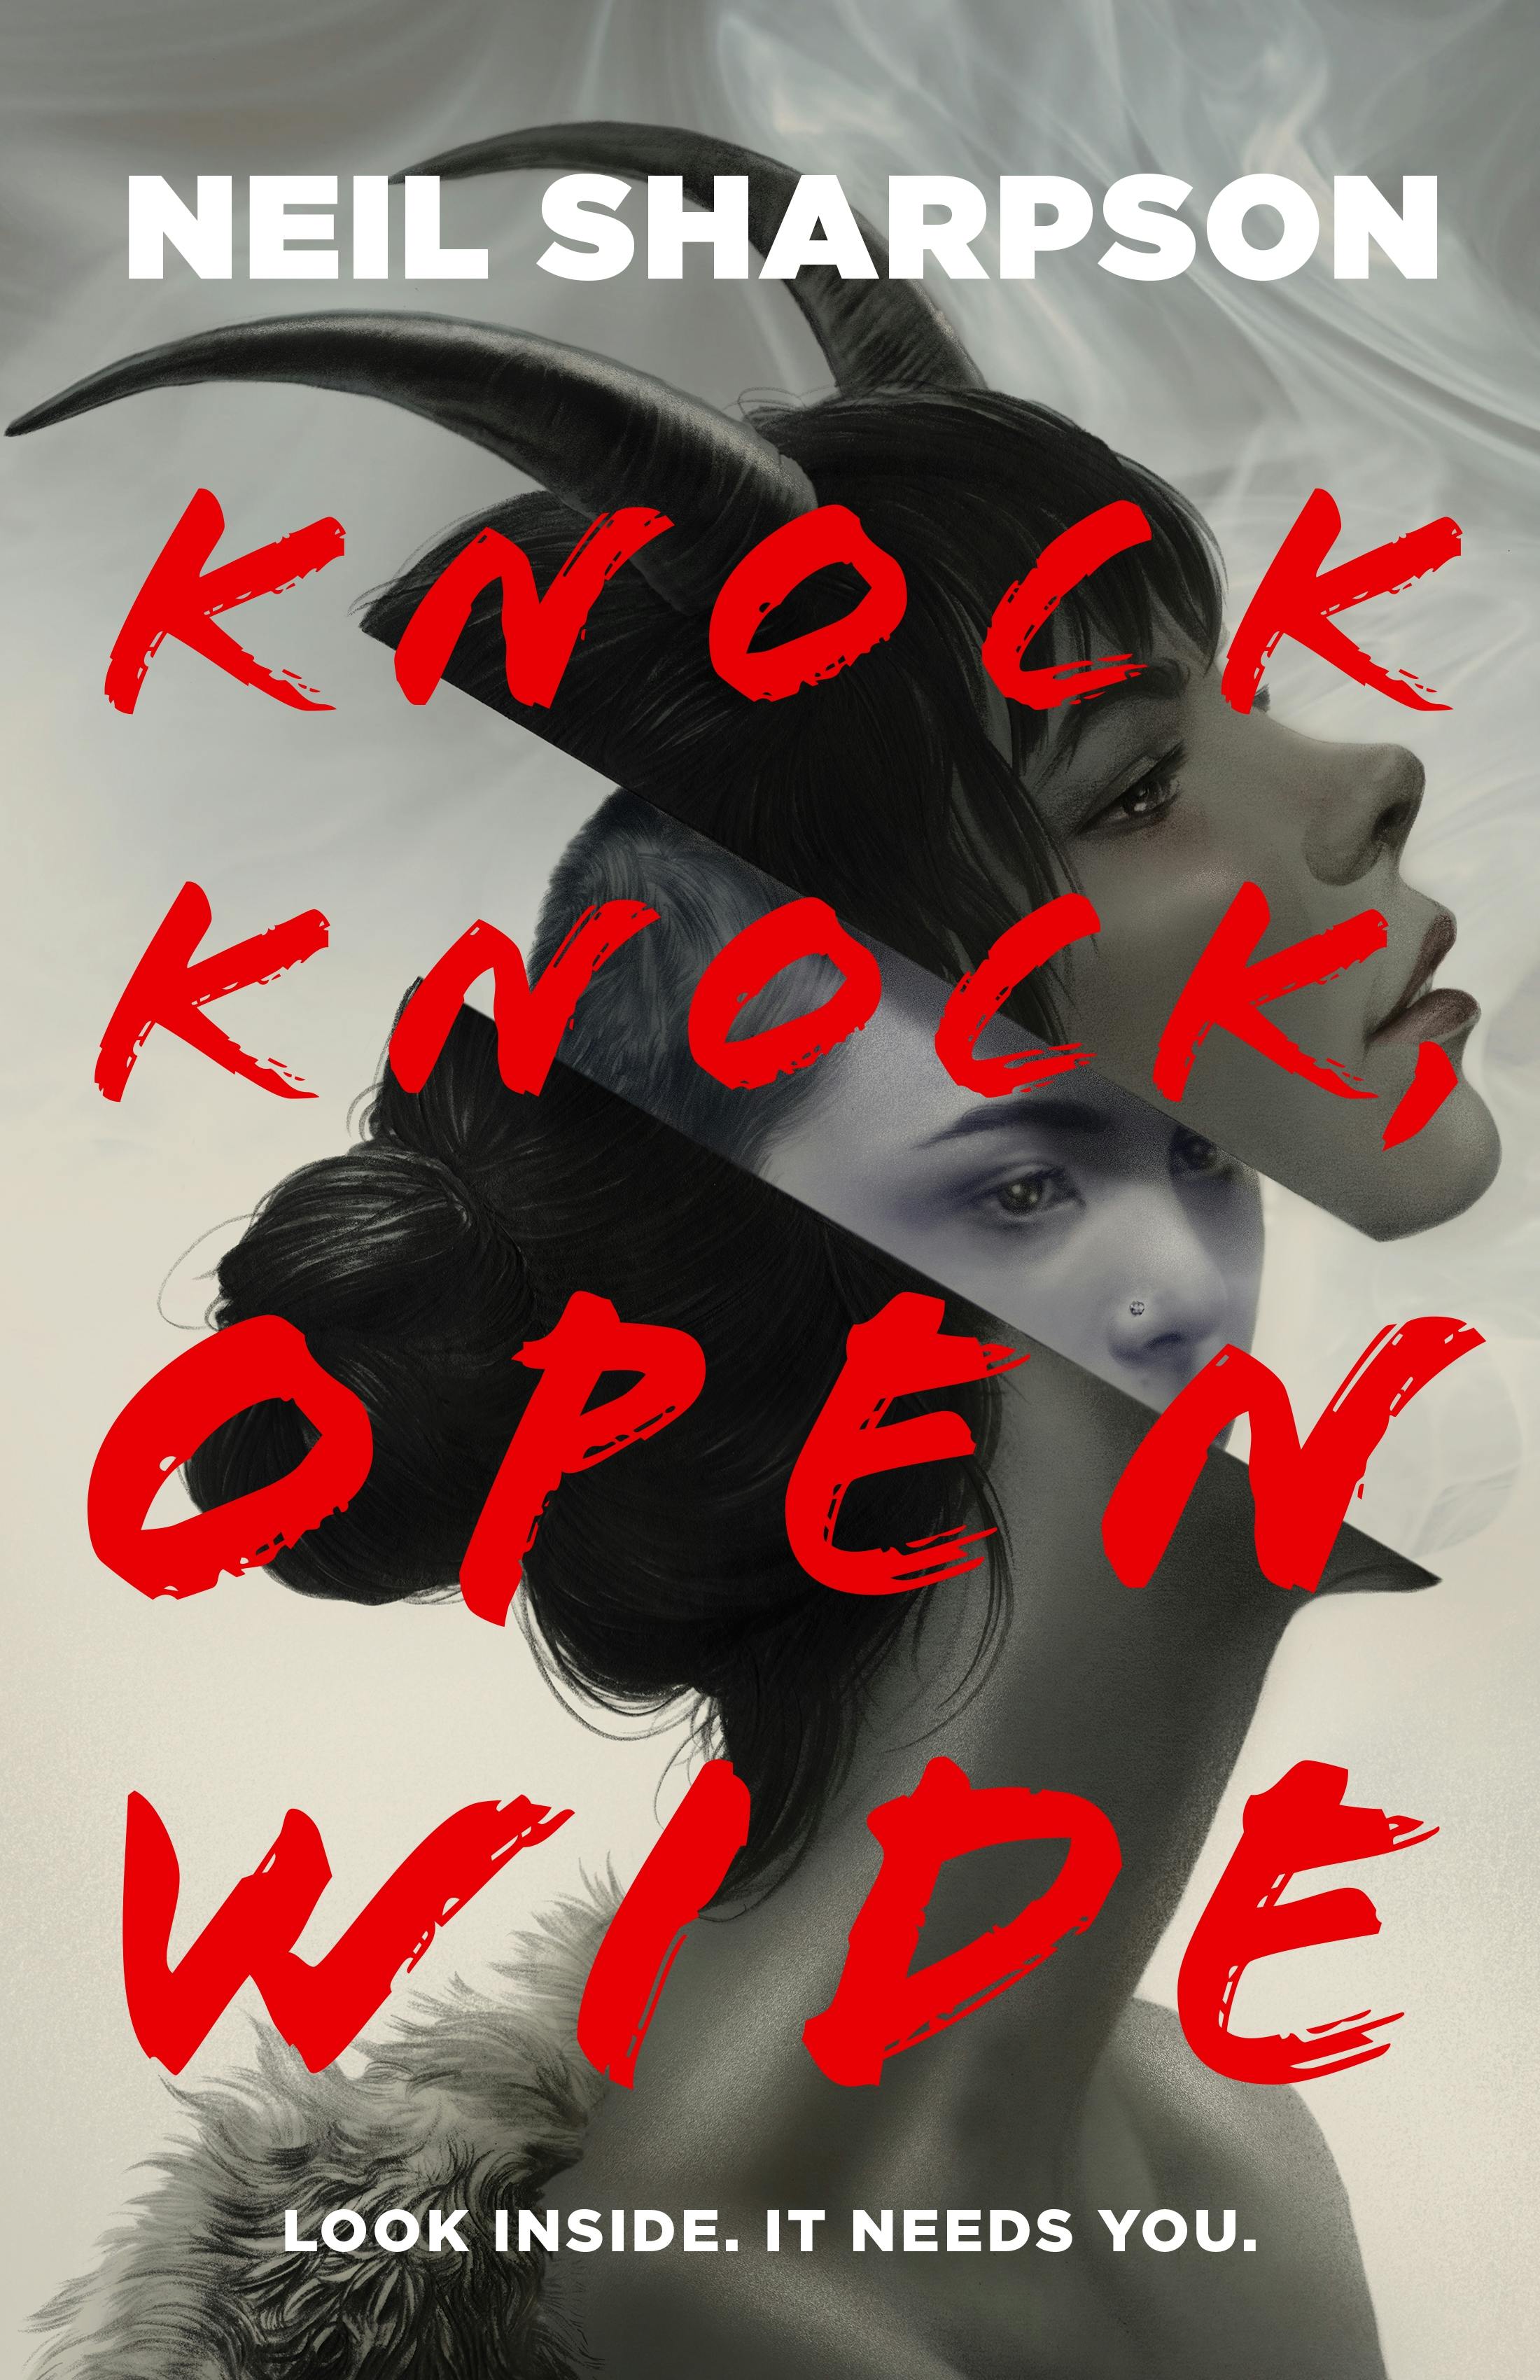 Cover for the book titled as: Knock Knock, Open Wide